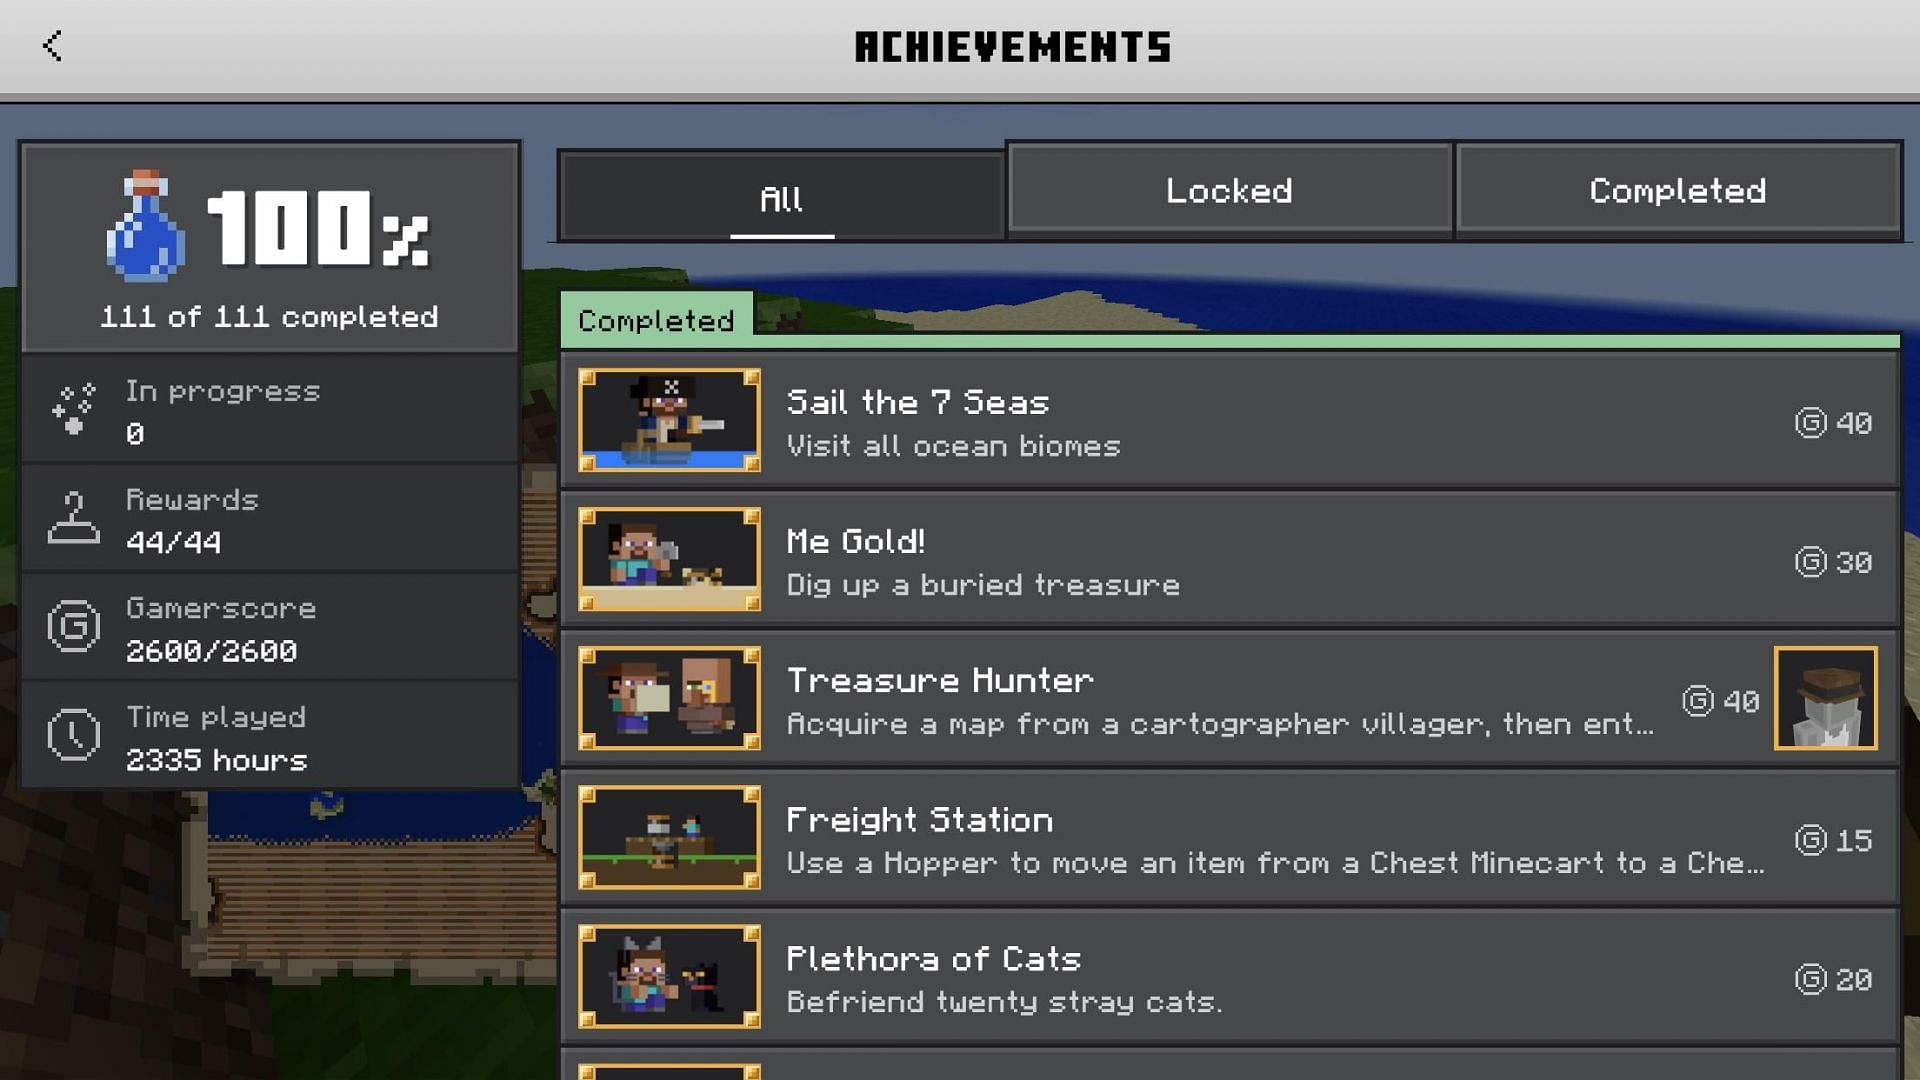 Minecraft achievements can be completed, though many are difficult. (Image via Minecraft)